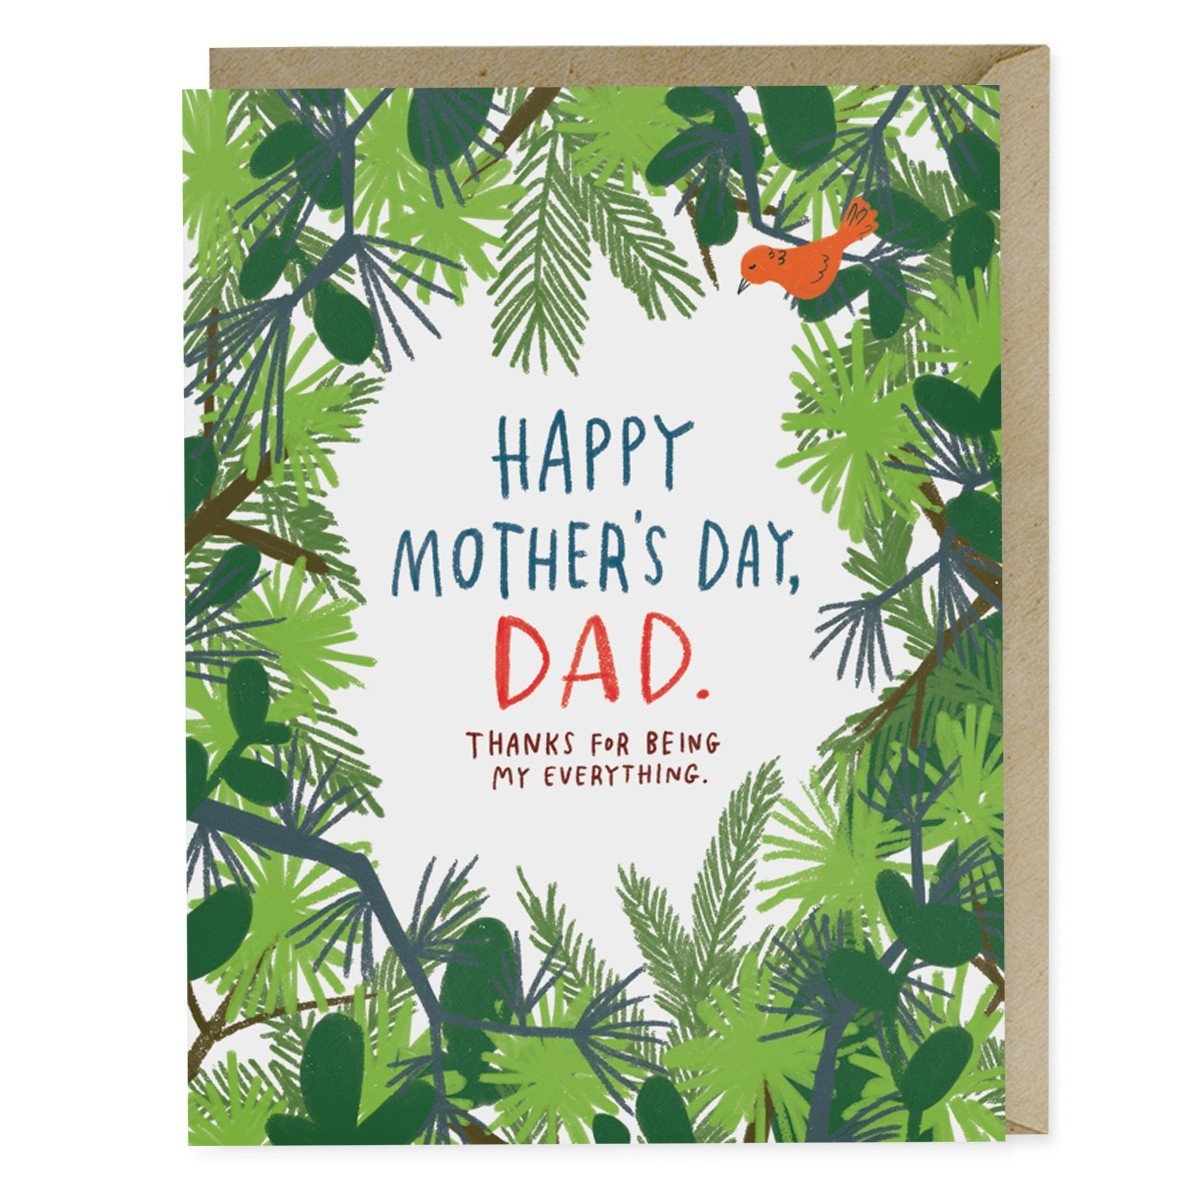 Mother's Day Cards for Dads, Grandparents, Spouses